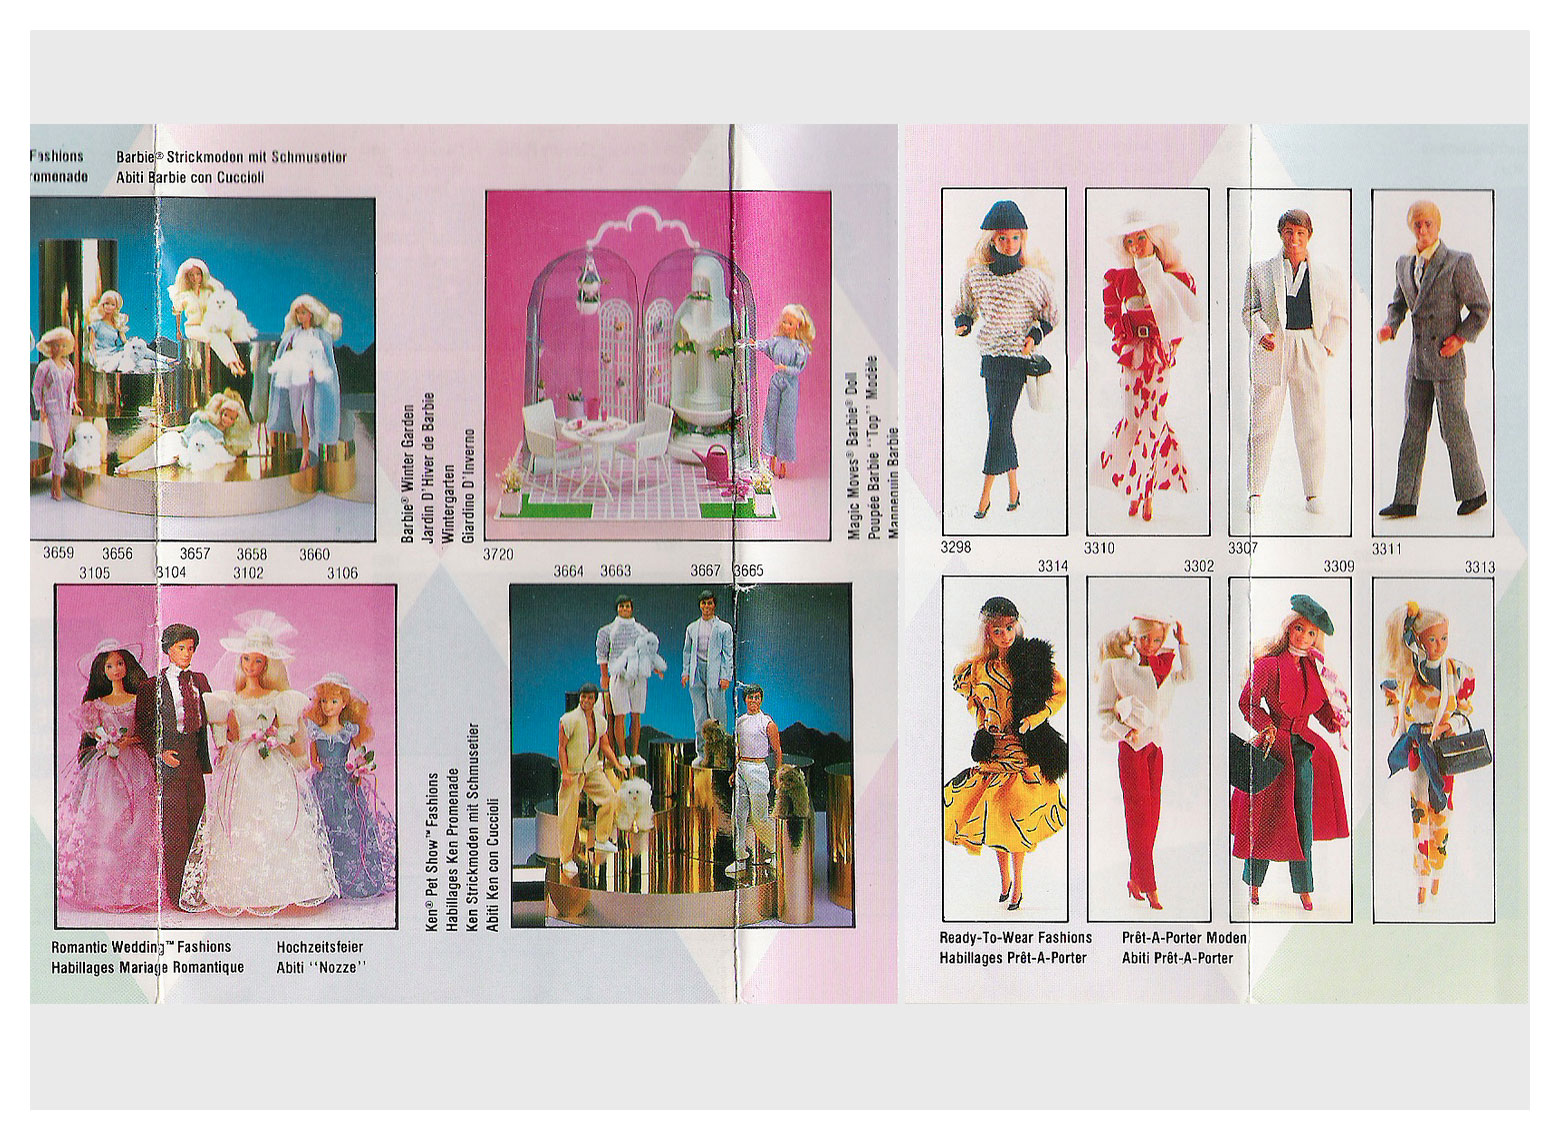 From 1987 European Barbie booklet